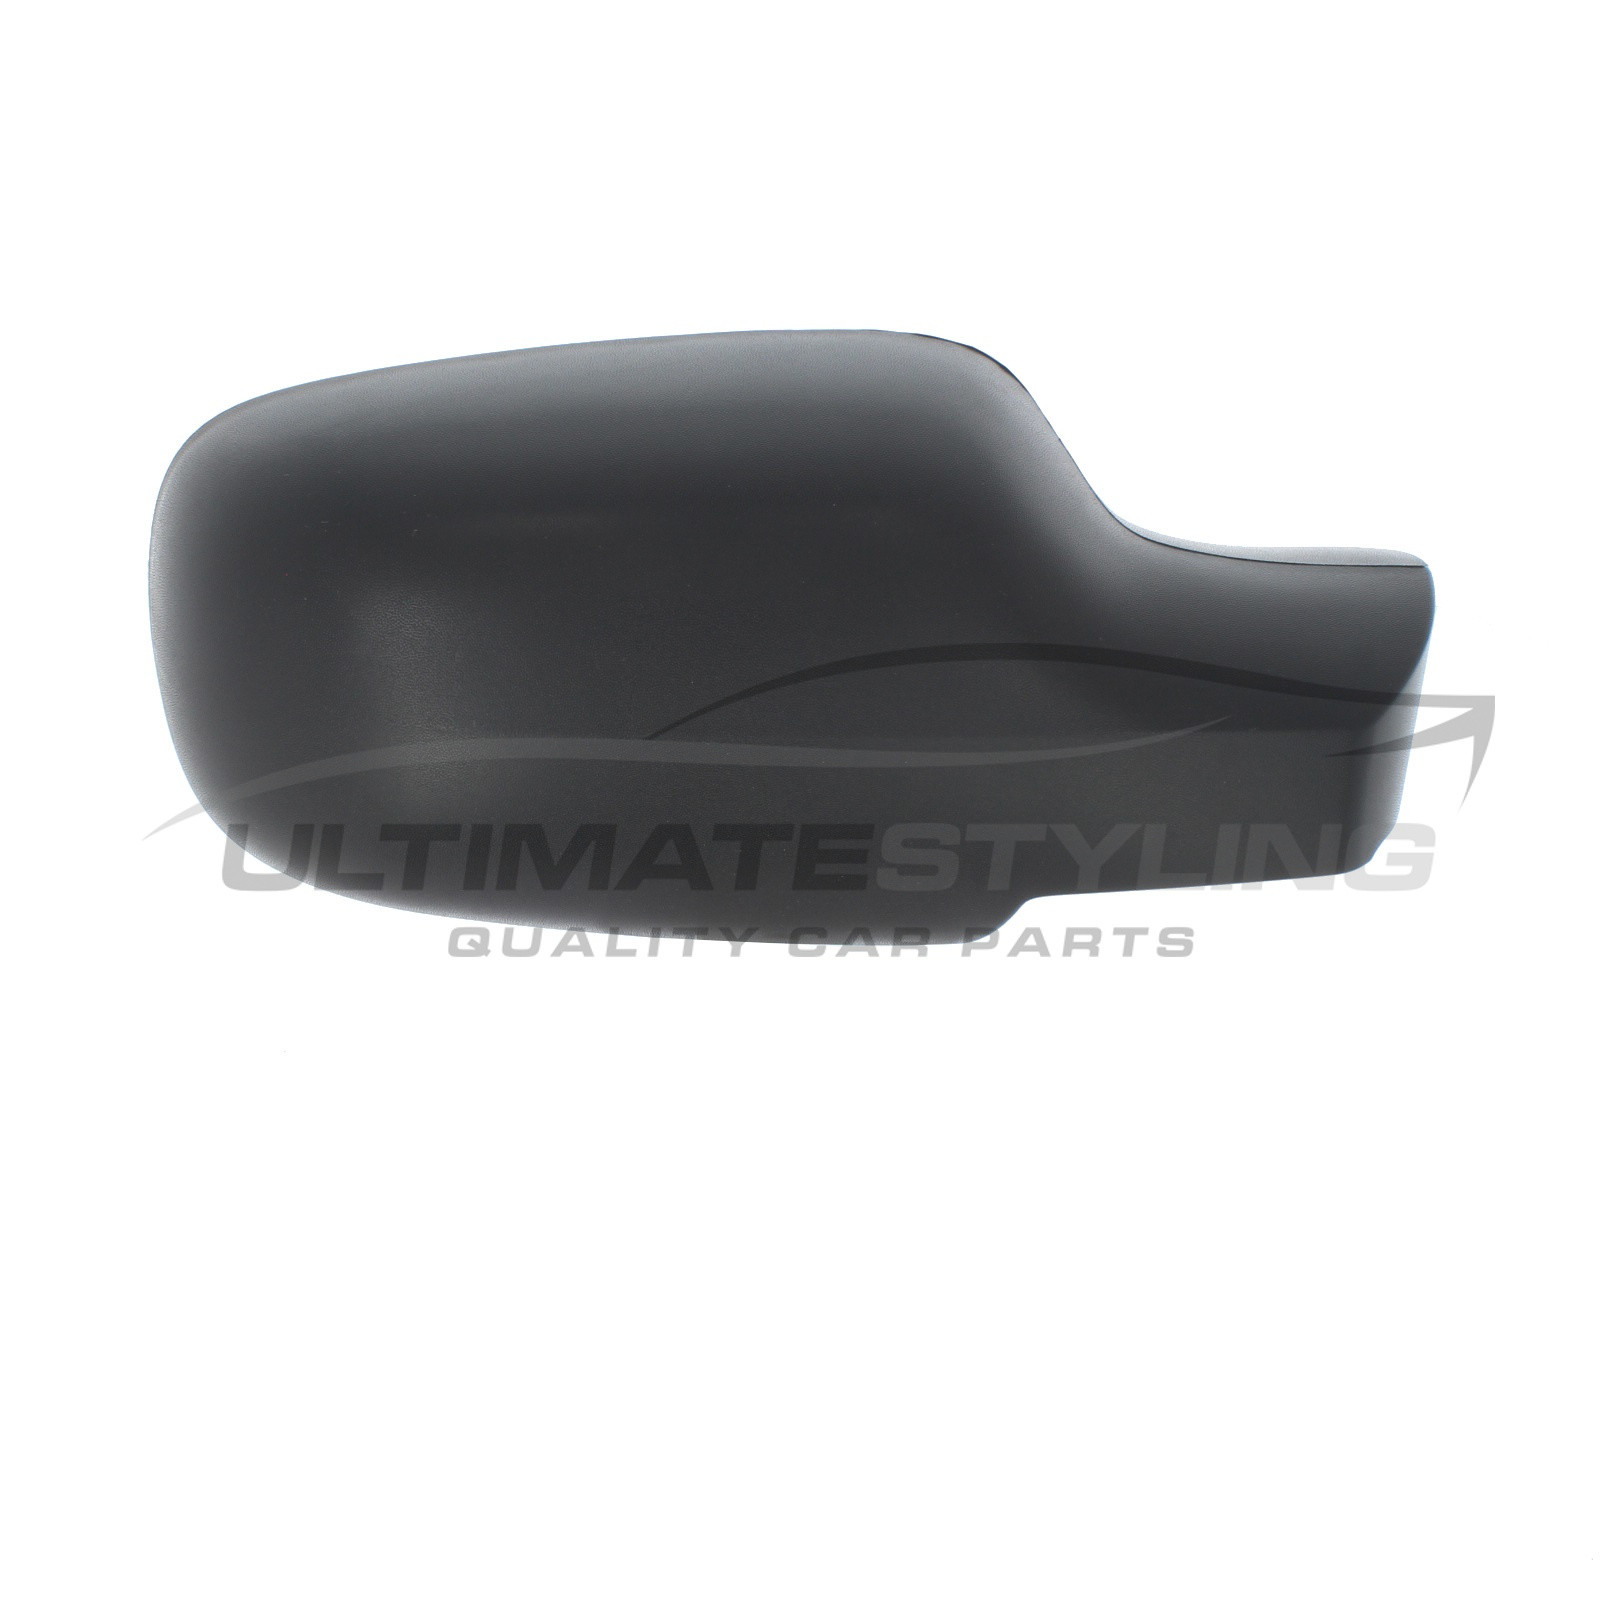 Renault Megane 2002-2009, Renault Scenic 2003-2009 Wing Mirror Cover Cap Casing Black (Textured) Drivers Side (RH)